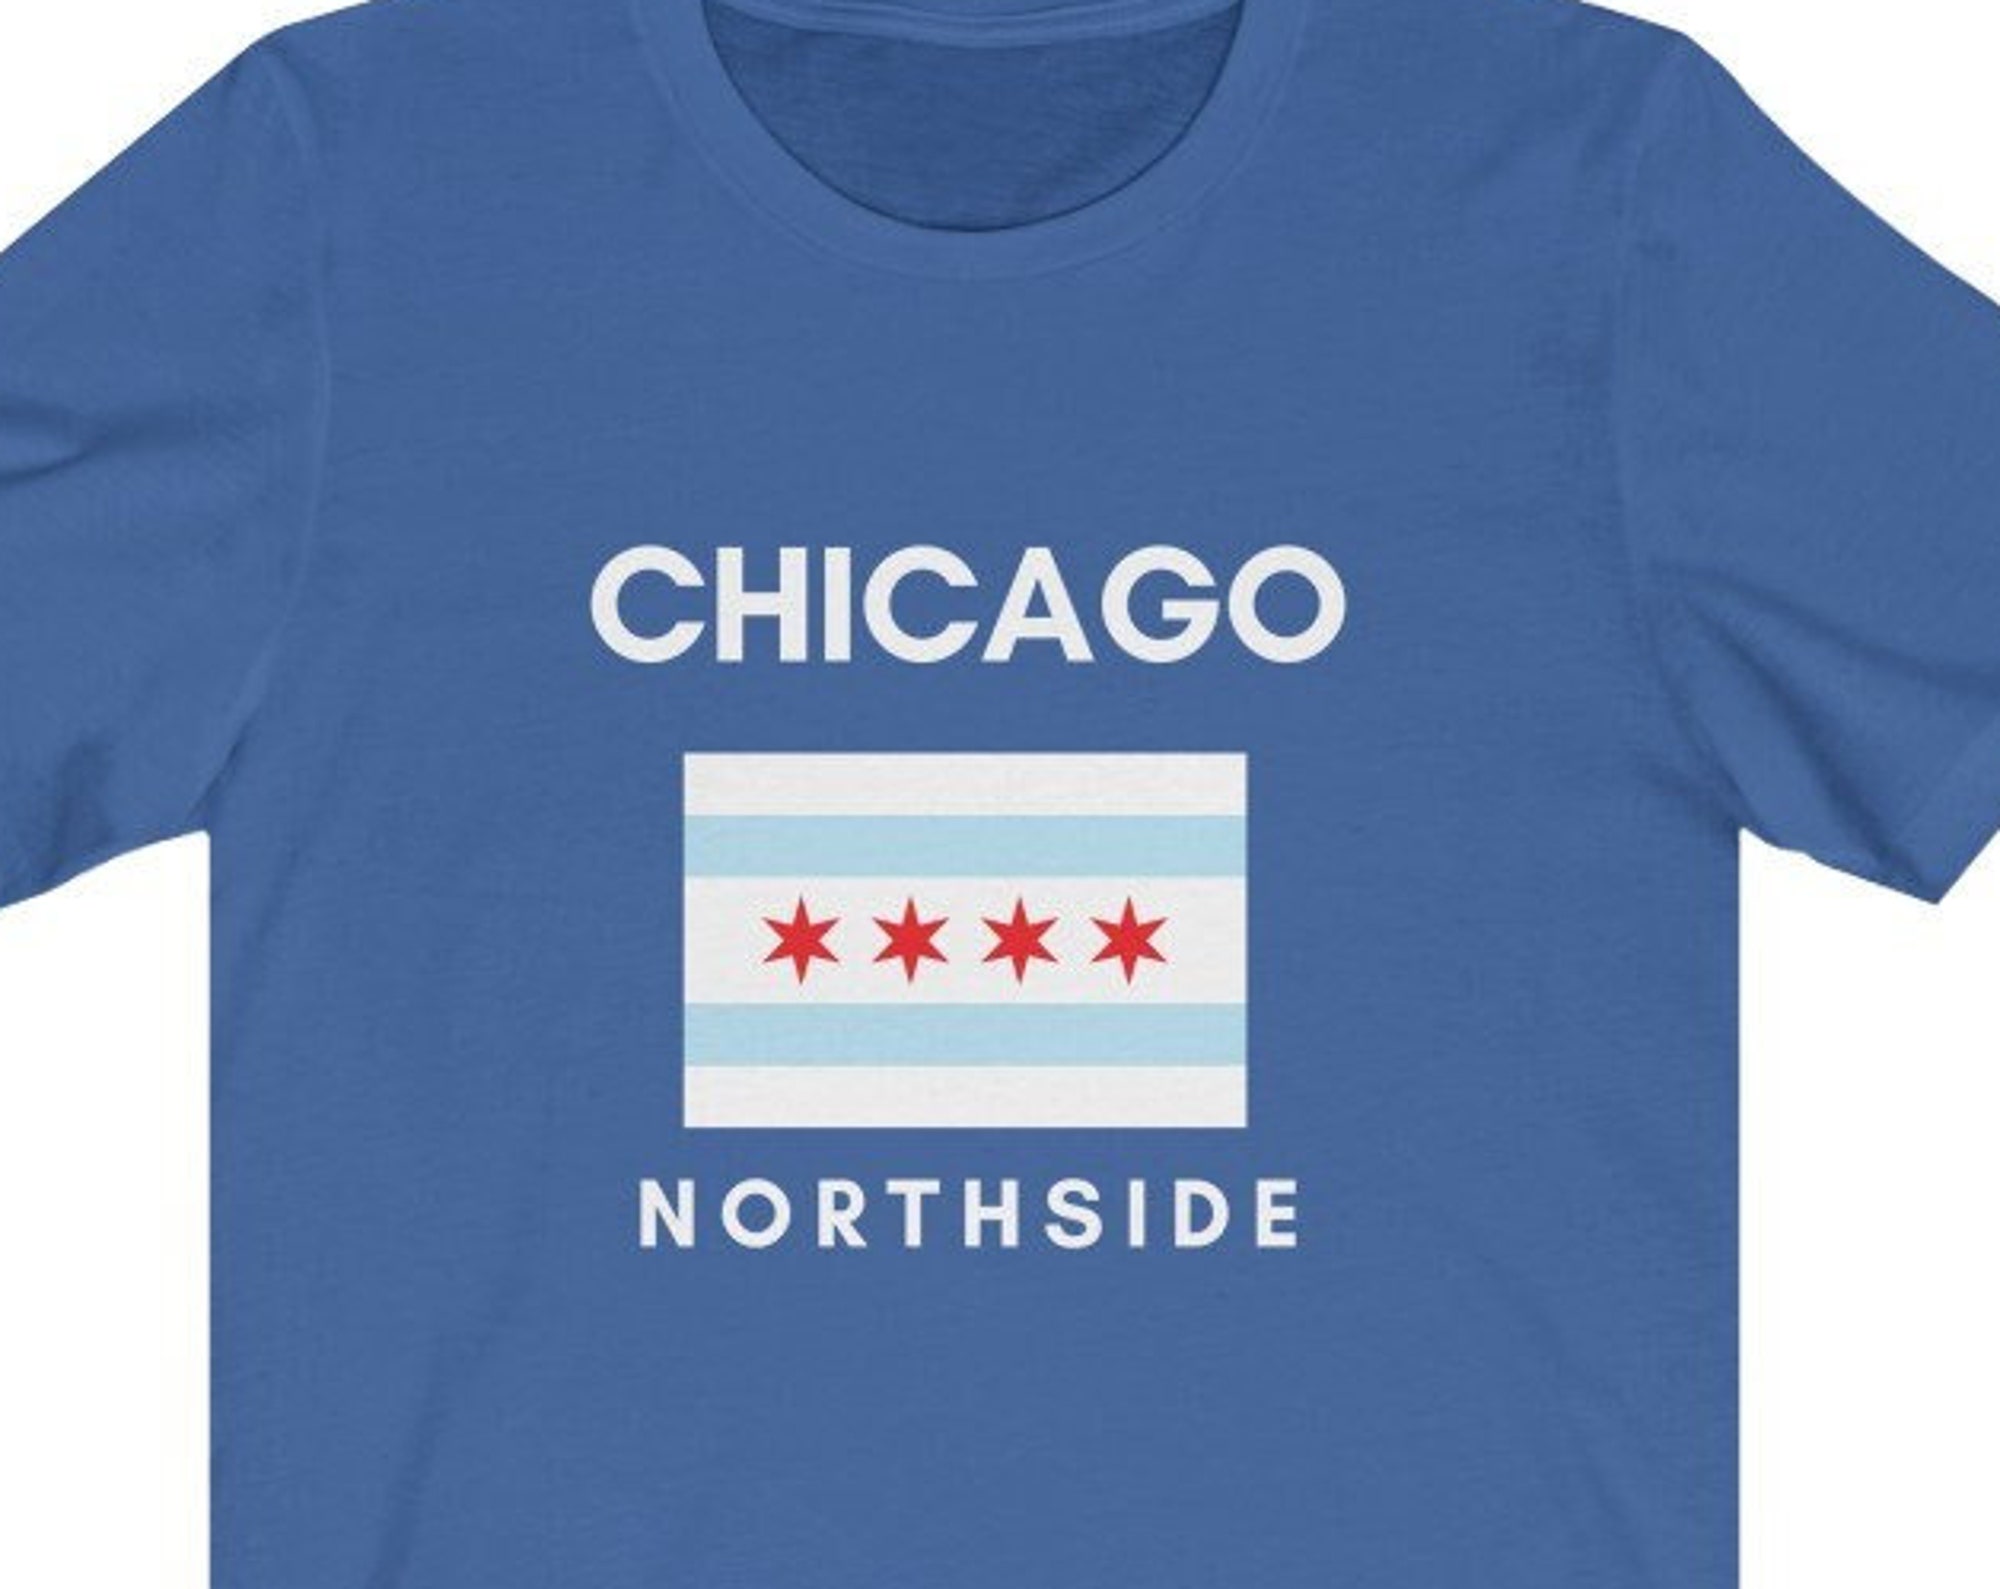 Chicago Adult Unisex Graphic T-Shirt, Chicago Northside Graphic Tee